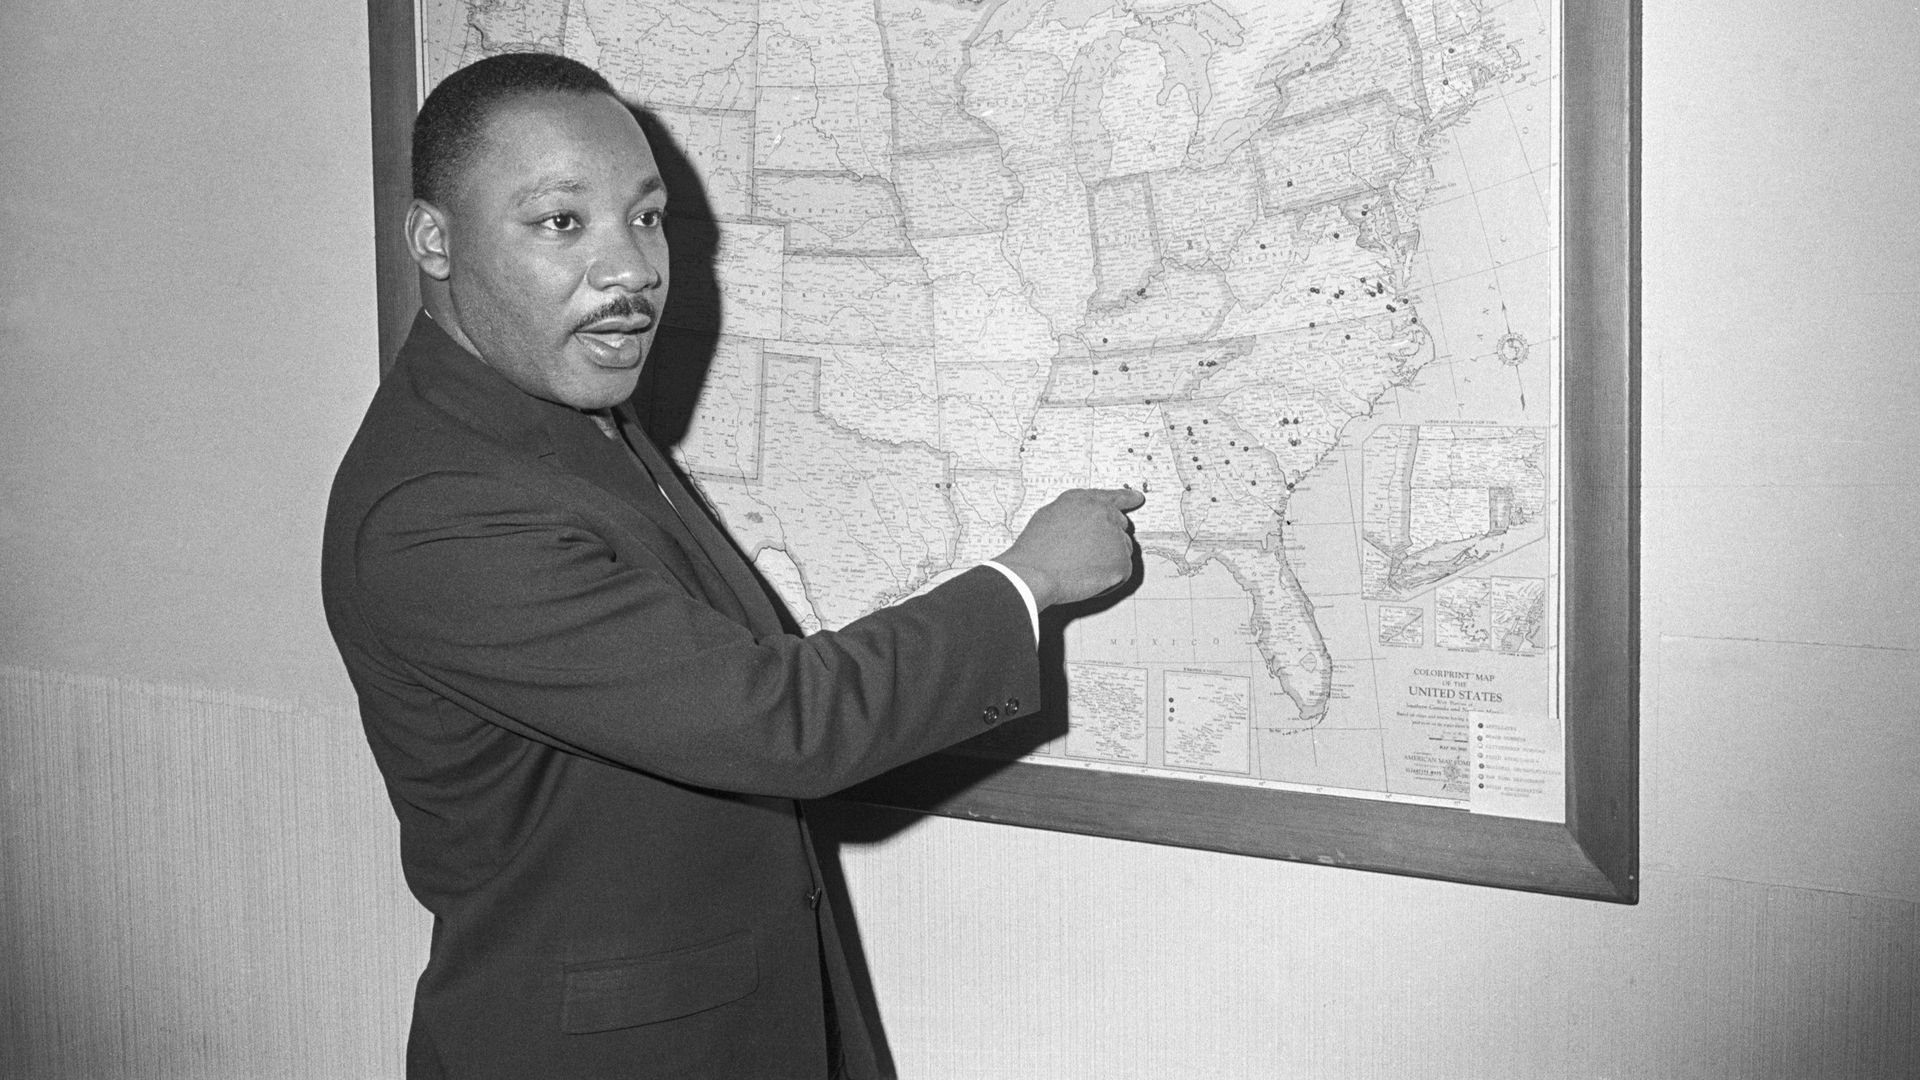 Martin Luther King, Jr, points to Selma, Alabama, on a map at his Atlanta Southern Christian Leadership Conference office in January 1965.